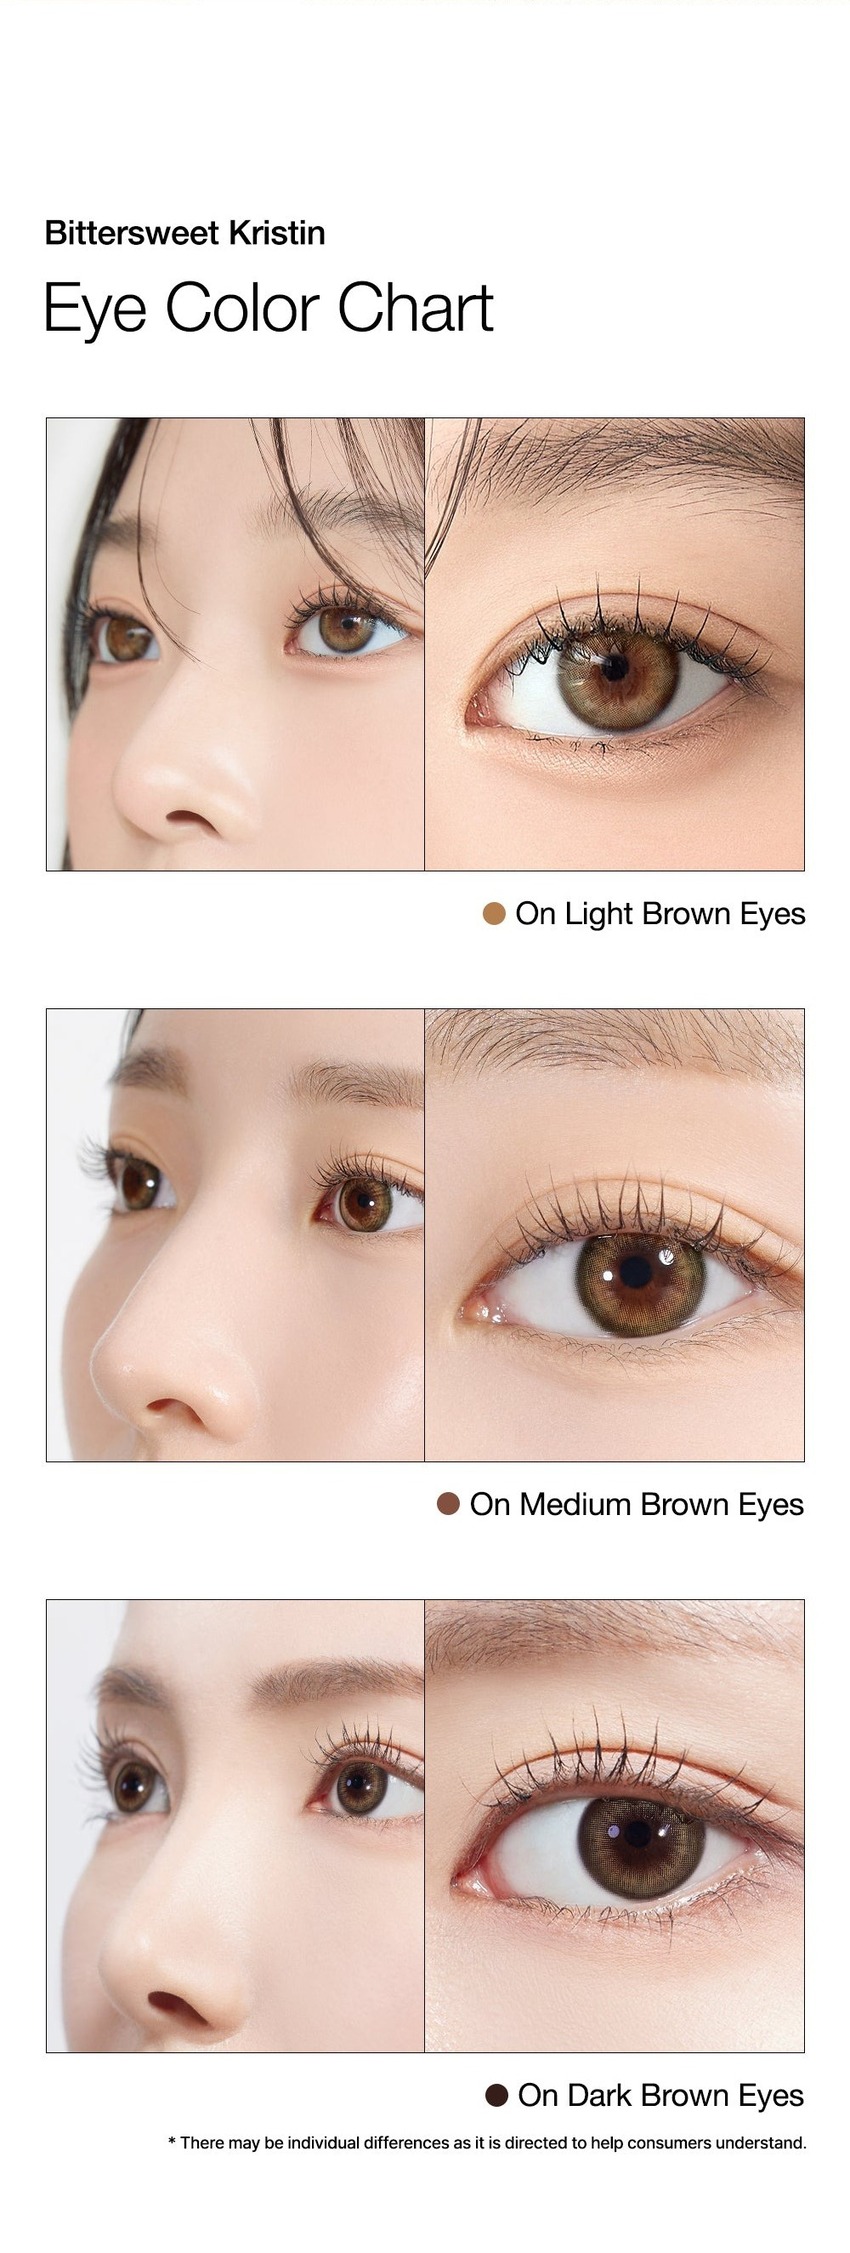 Hapakristin's Bittersweet lenses offer a unique and natural in nature appeal.